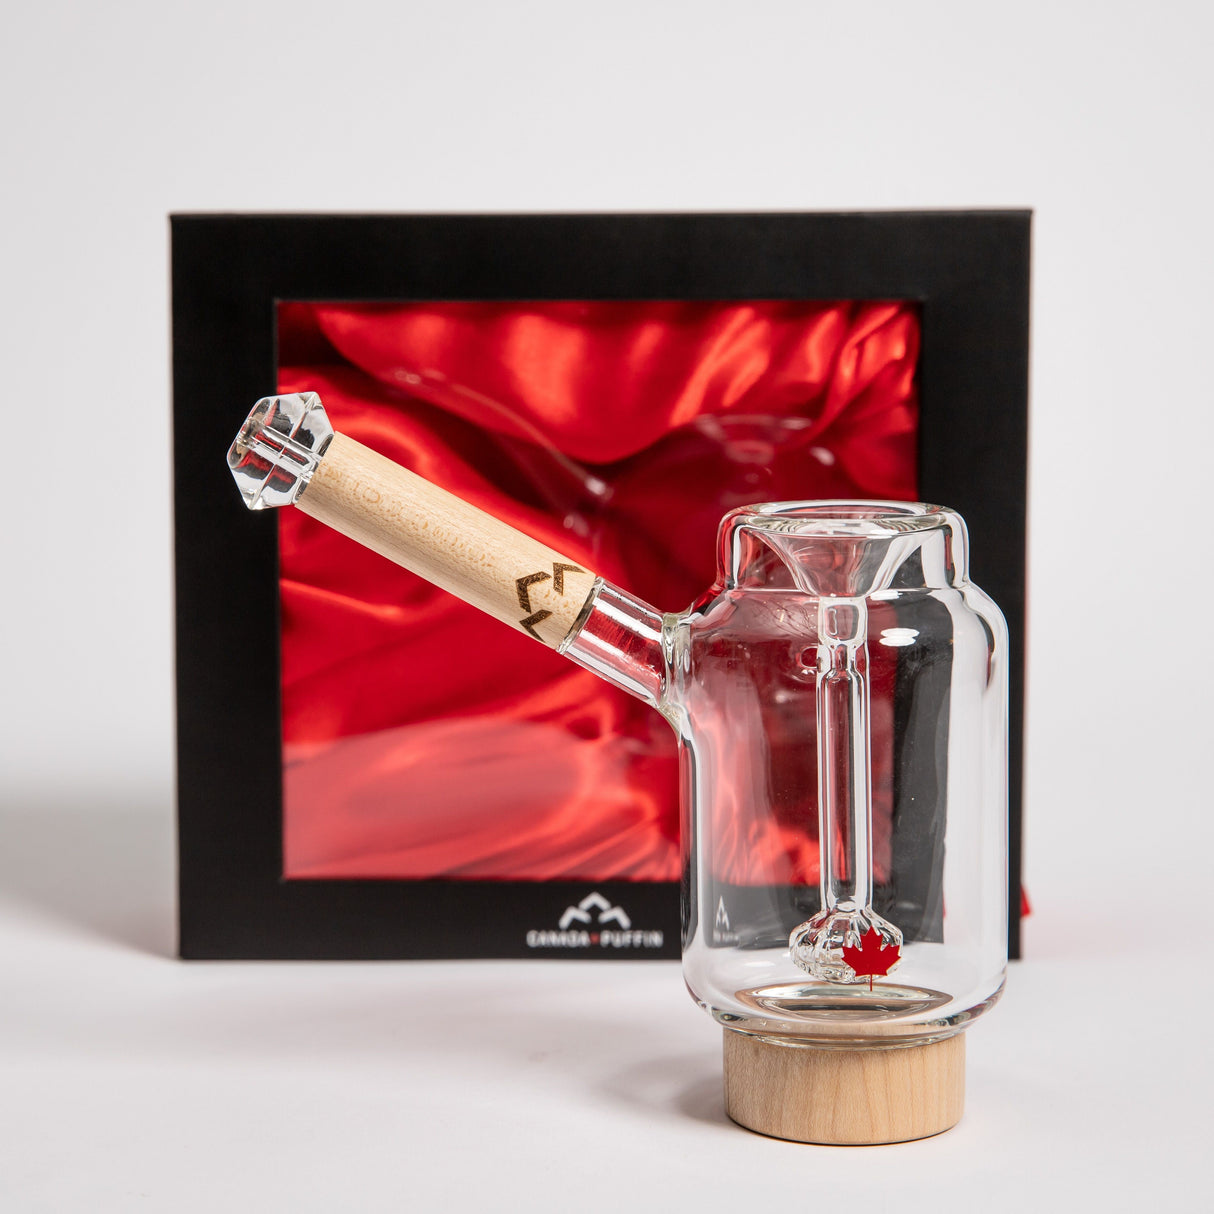 Canada Puffin Arctic Bubbler front view with wooden base and red satin background